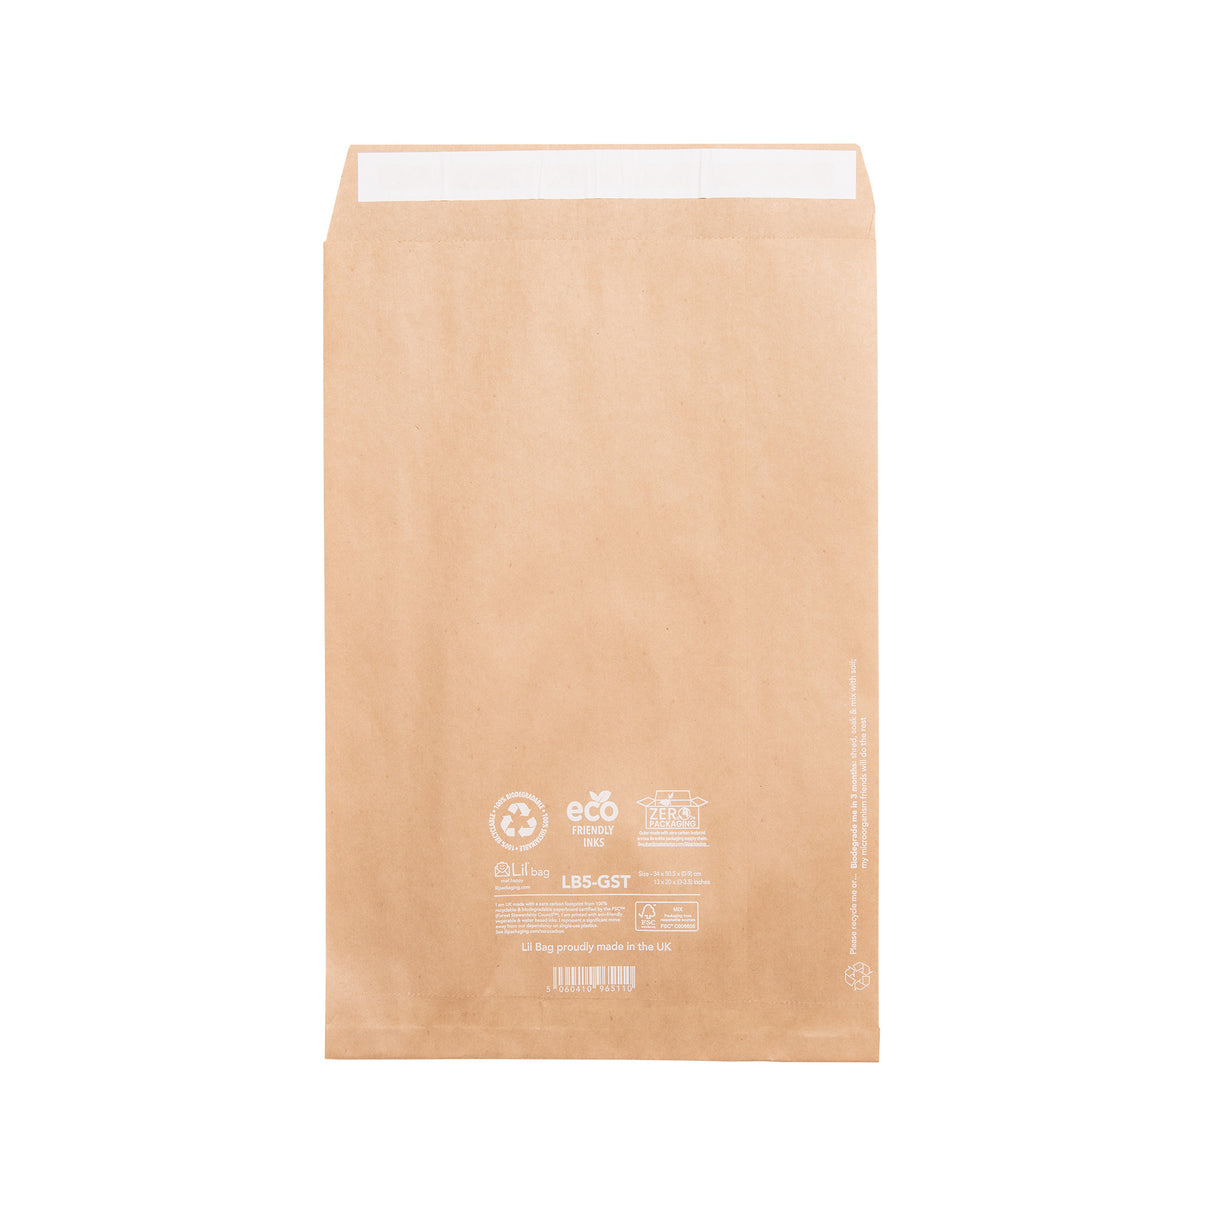 LB5-gst Gusseted Paper Mail Bag | Lil Packaging